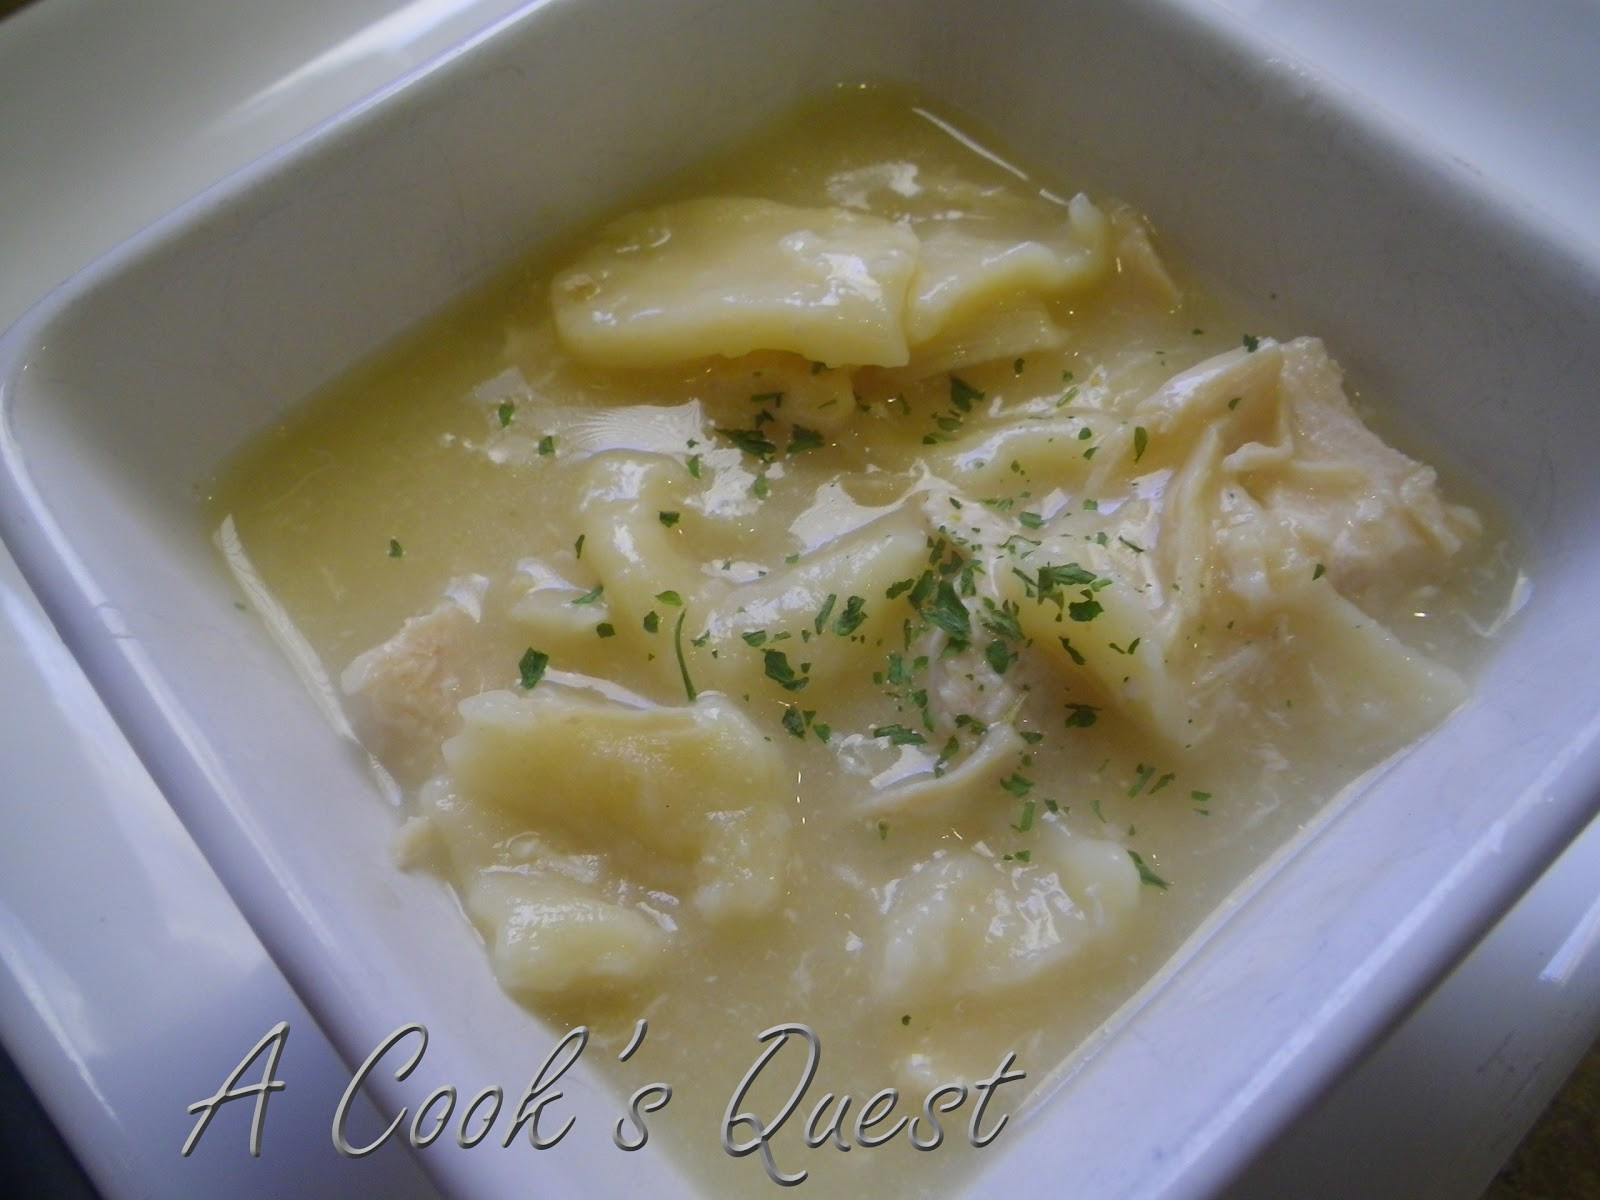 Microwave Chicken And Dumplings
 A Cook s Quest Chicken and Dumplings